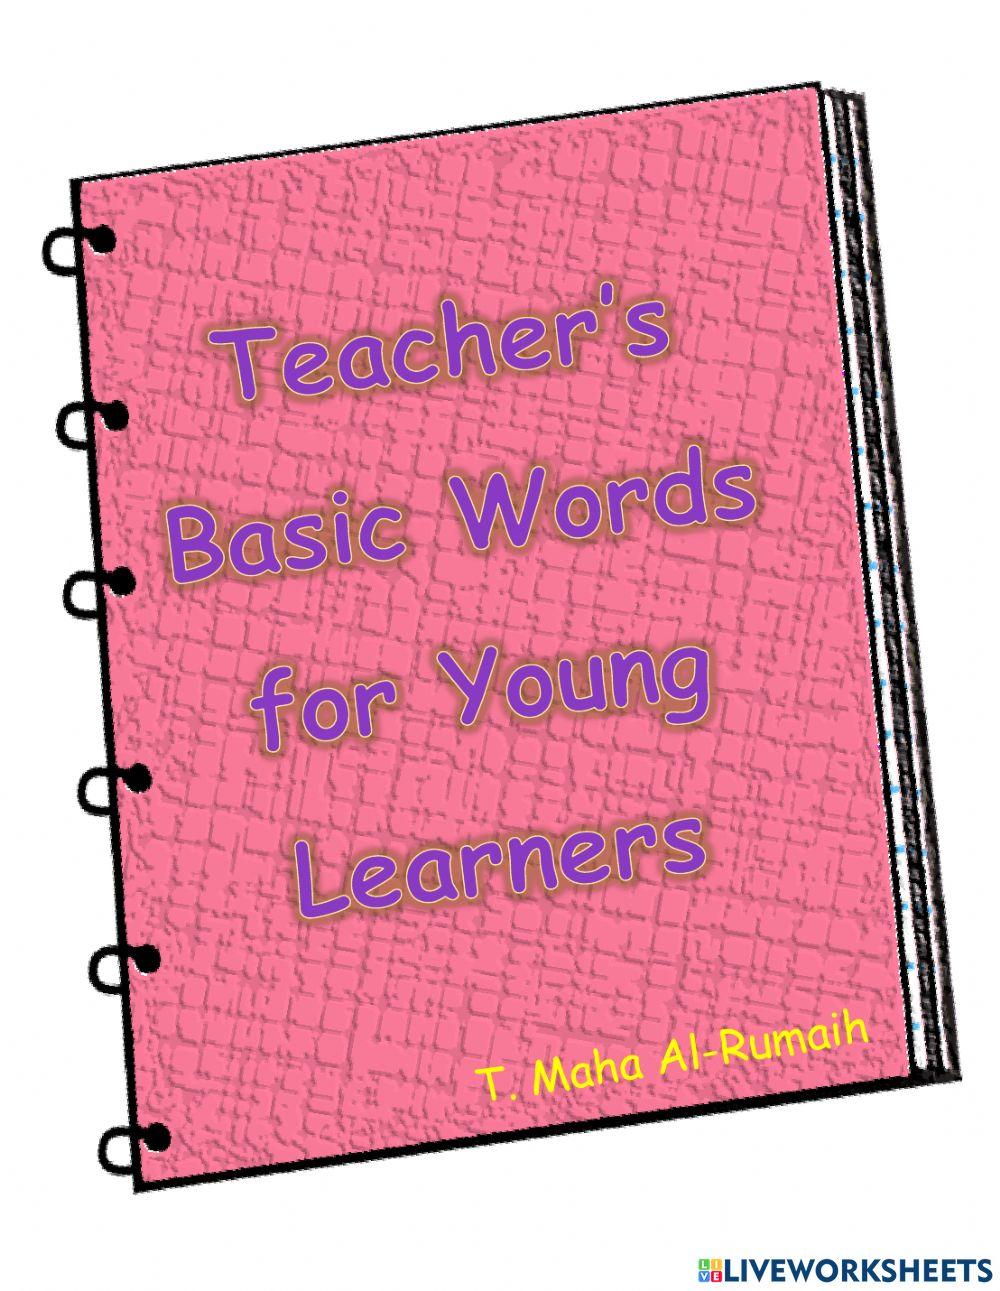 Teacher's basic words for young learners